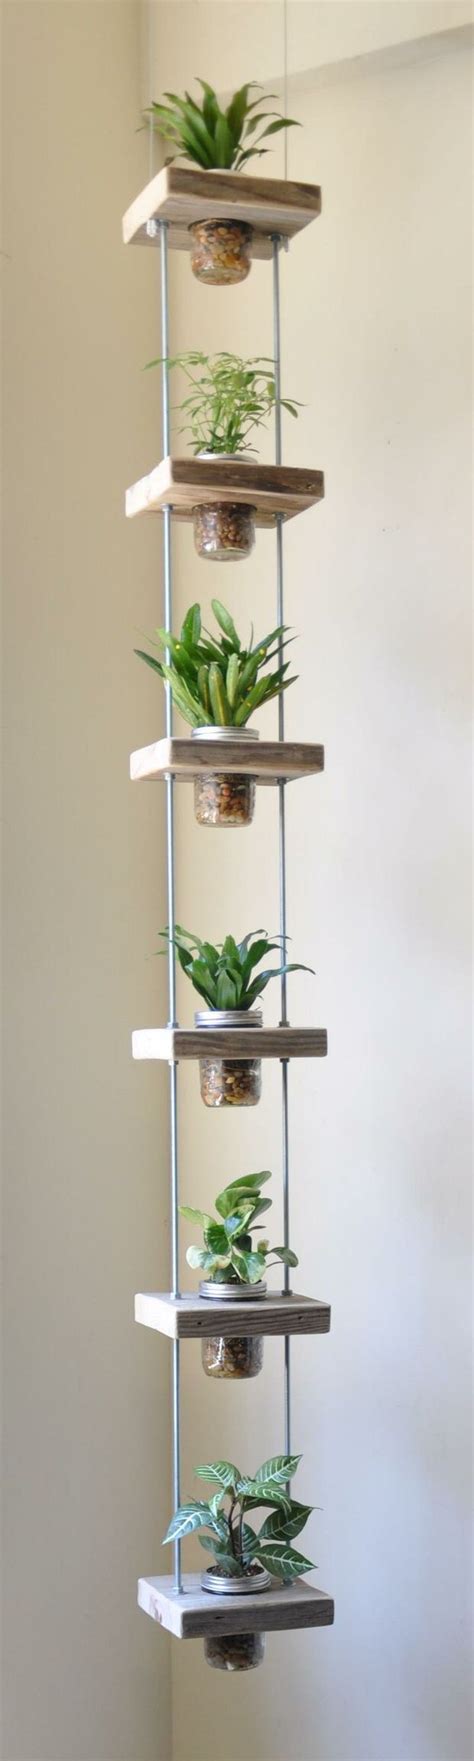 No green thumb required, fully automated. Indoor Vertical Wall Garden Ideas Pictures, Photos, and ...